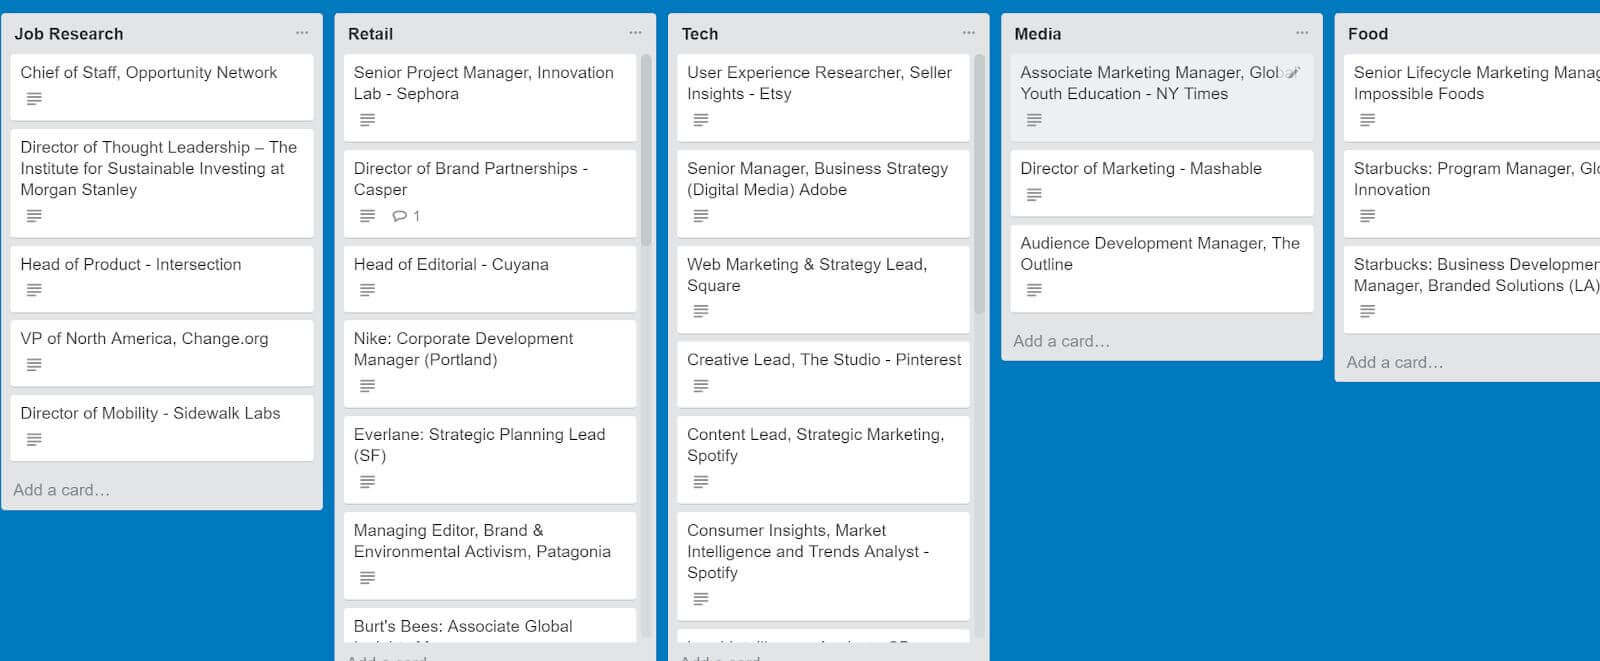 How to use Trello lists to organize your job search